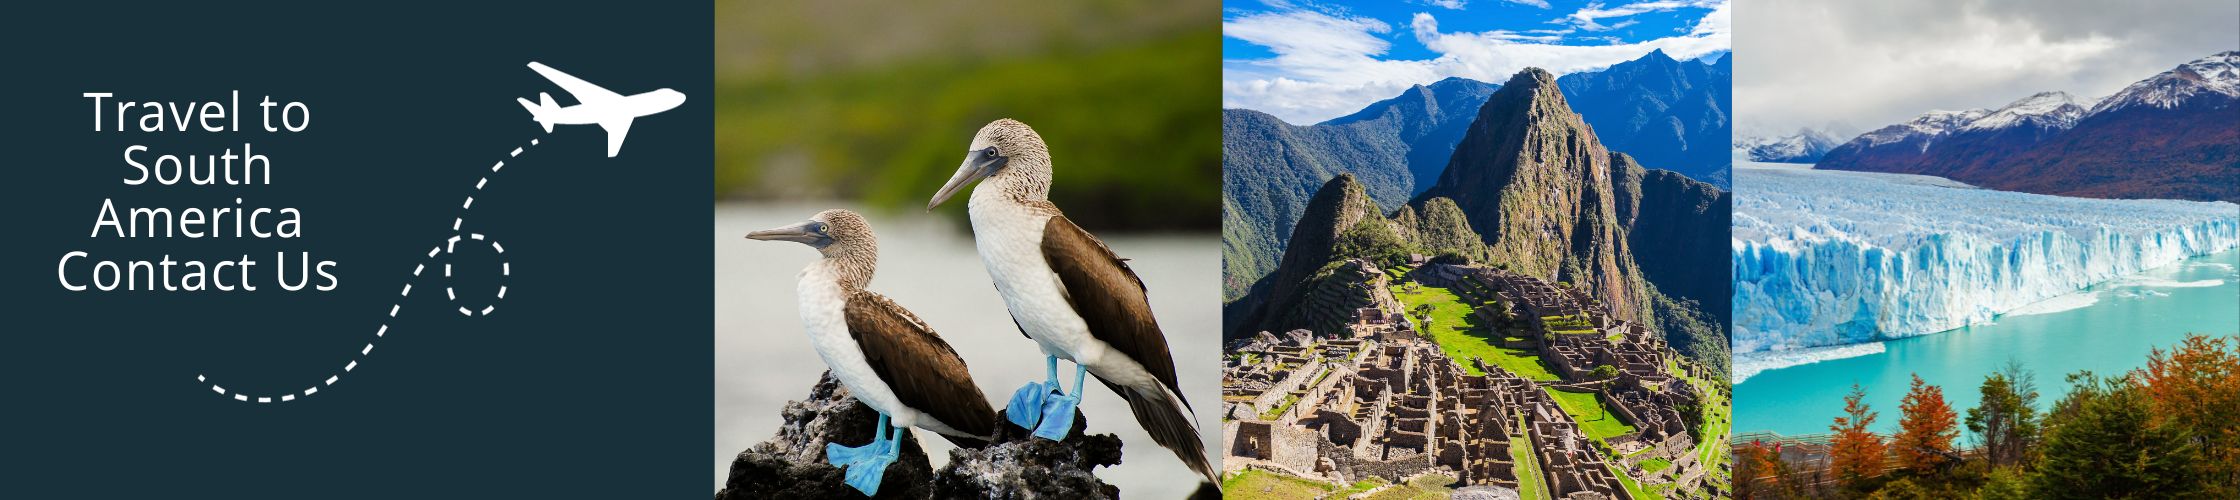 Visit South America with us